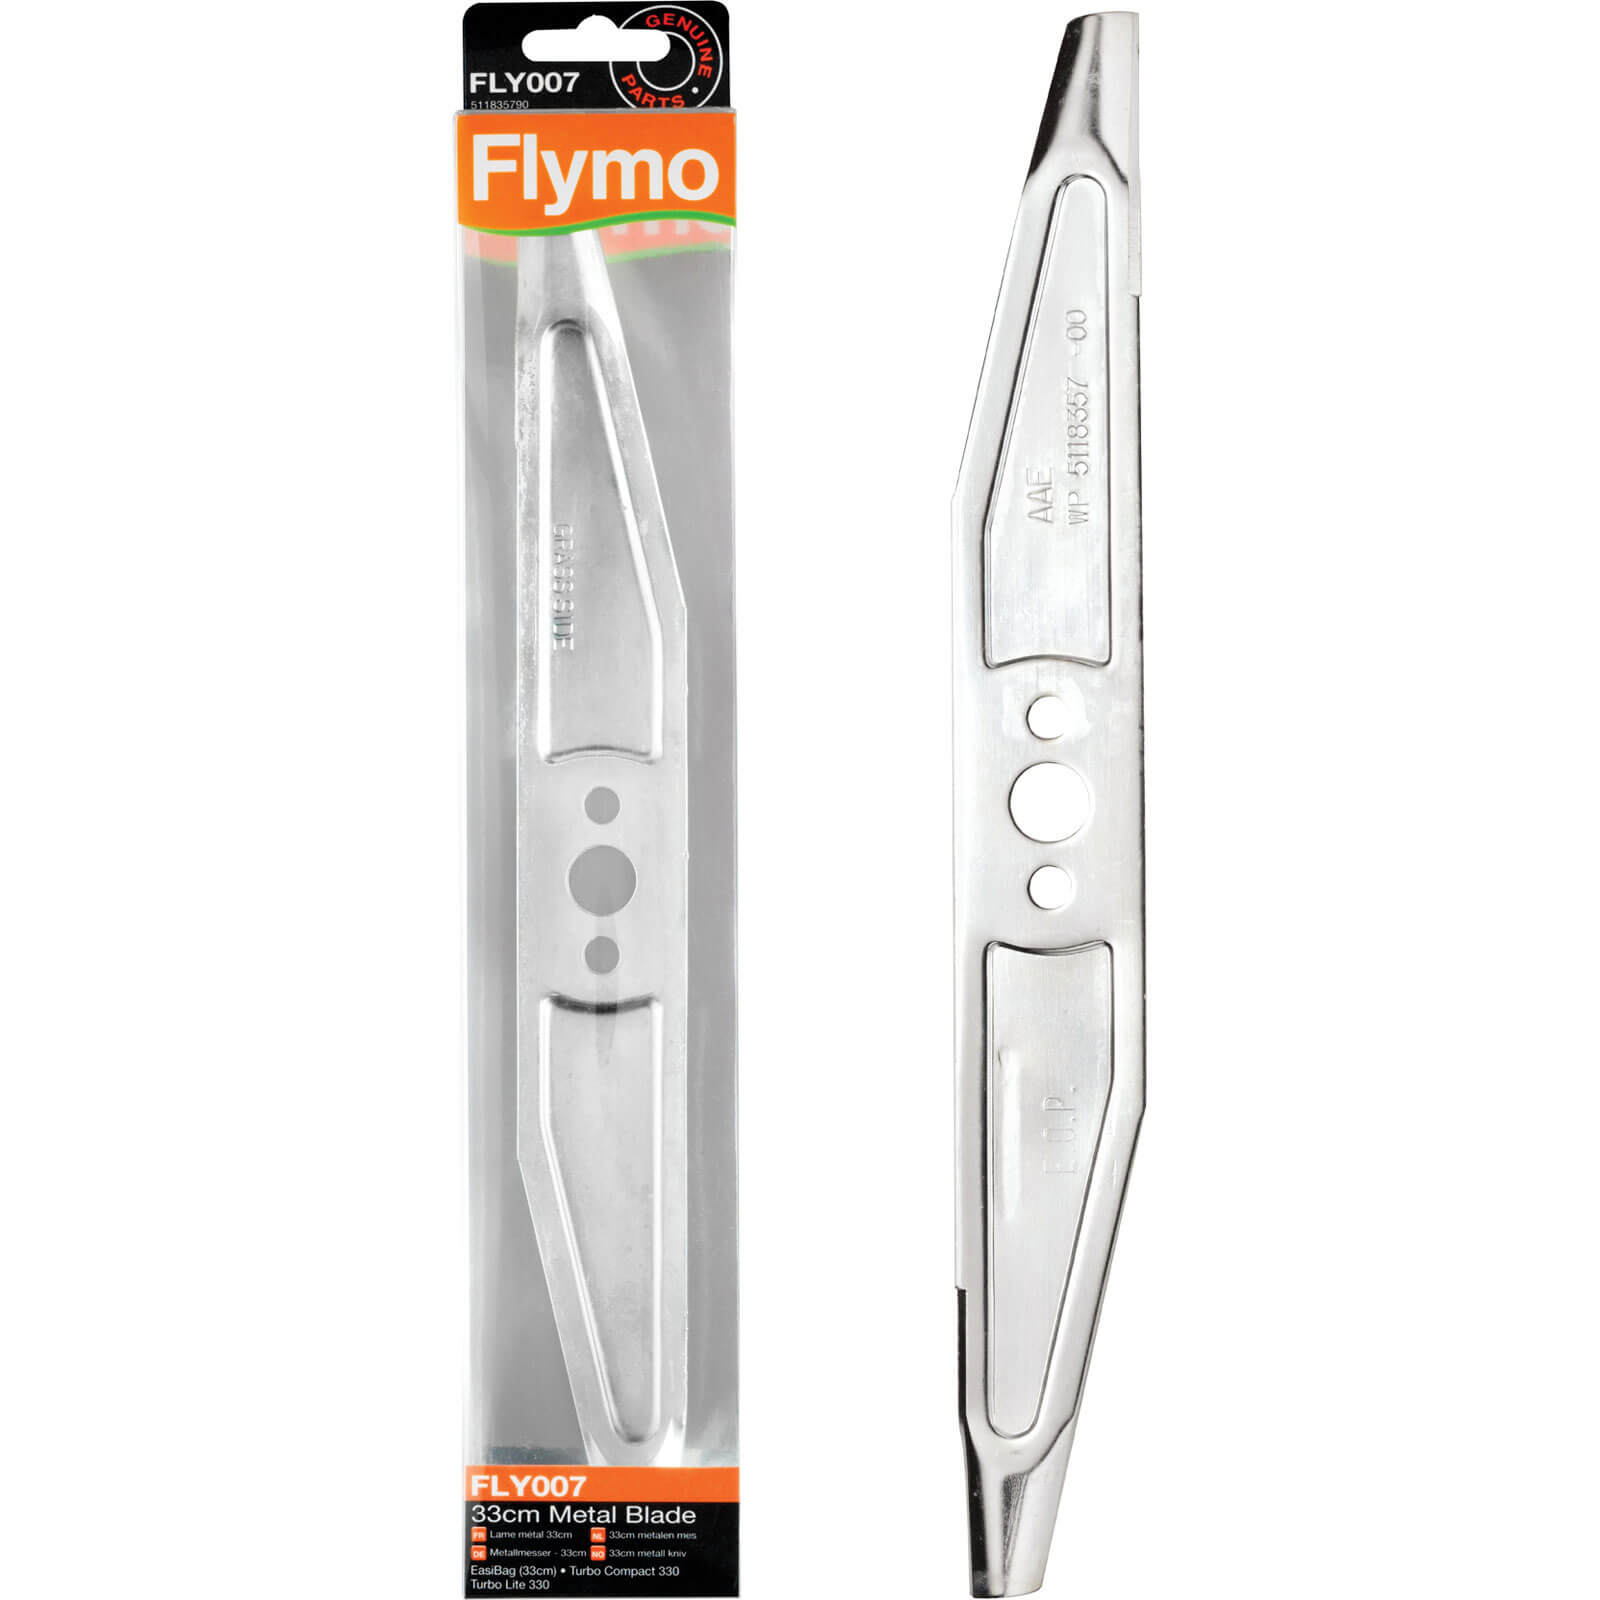 Image of Flymo FLY007 Genuine Blade for TC330, TCV330, VC330, TL330 Lawnmowers 330mm Pack of 1